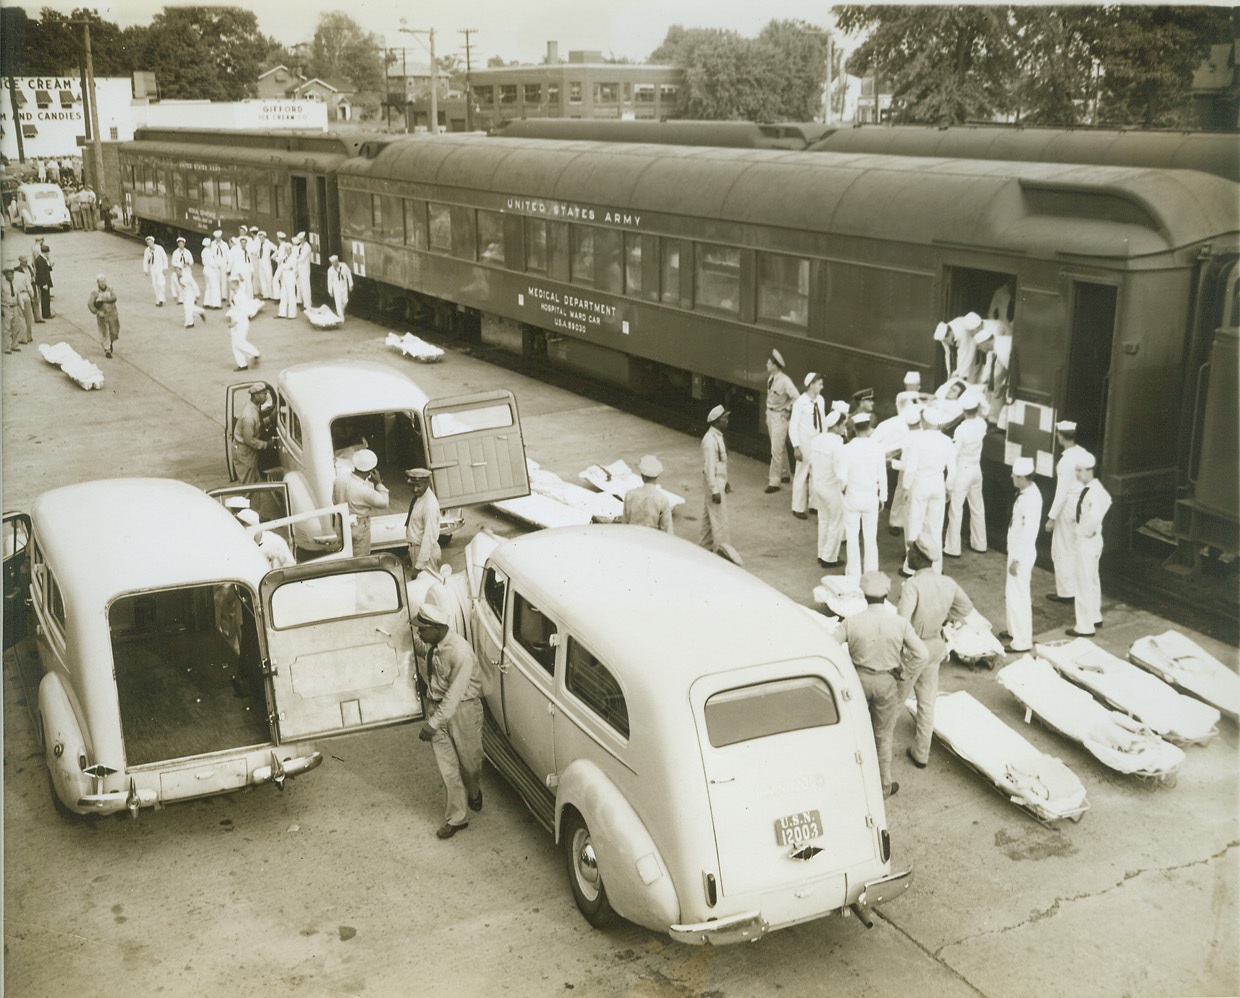 Navy's Normandy Wounded Brought Home, 8/2/1944. WASHINGTON, D.C. -- With ambulances and stretchers waiting, some of the one hundred and twenty nine Navy men wounded in Normandy are lifted from a hospital train which carried them to Silver Springs where they will receive further treatment in the Naval Medical Hospital. These Naval heroes were brought across the Atlantic from France in a hospital ship. Credit: (ACME);